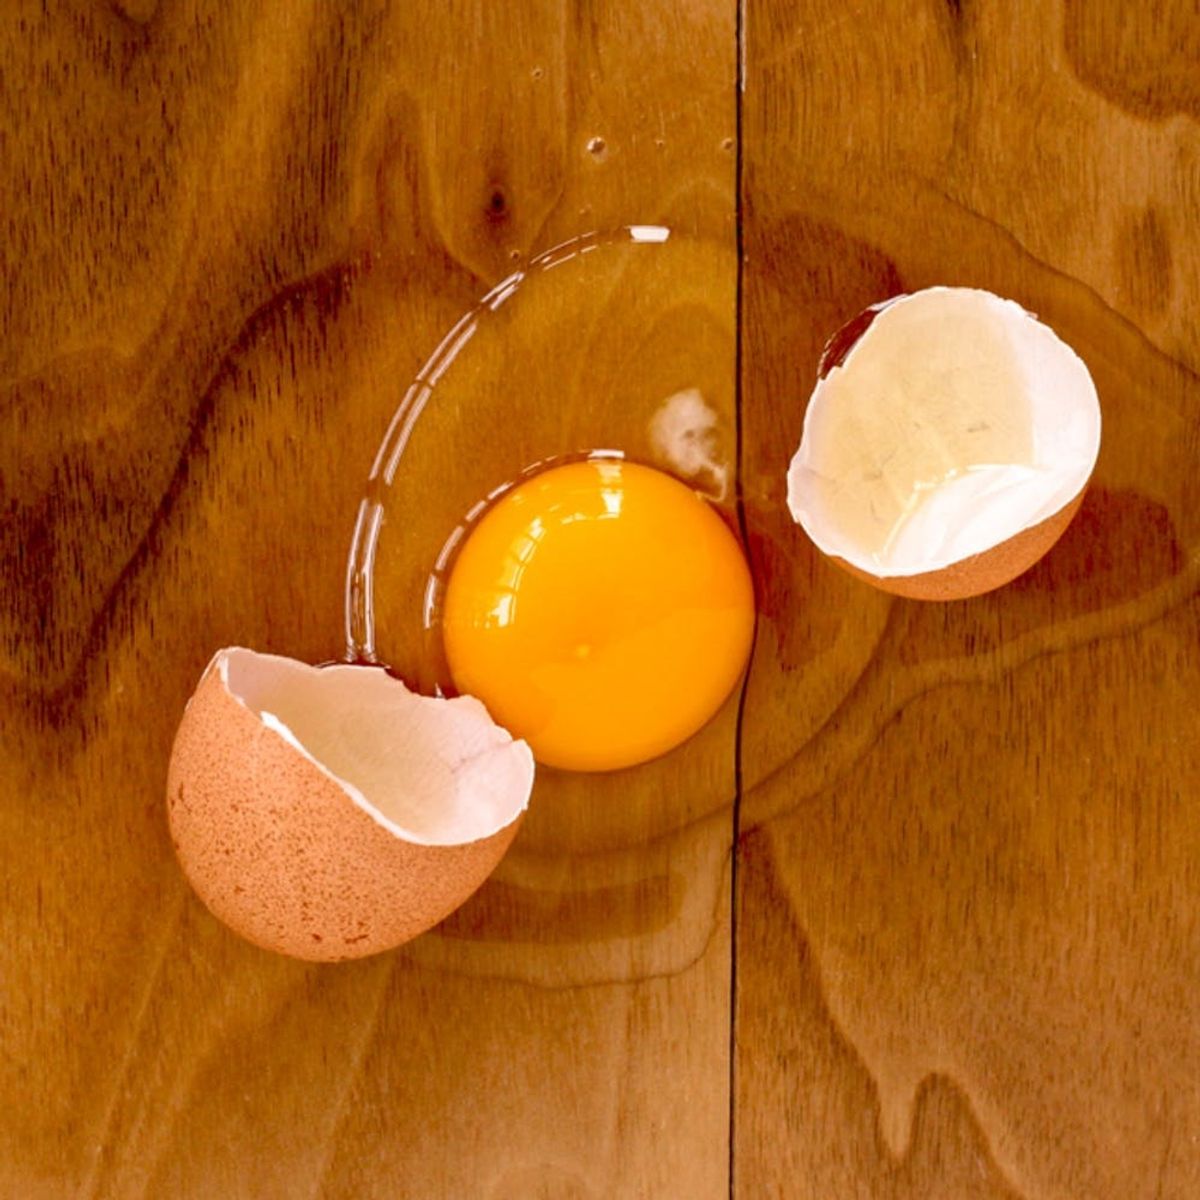 This Simple Tip Makes Cleaning Up Broken Eggs a Breeze